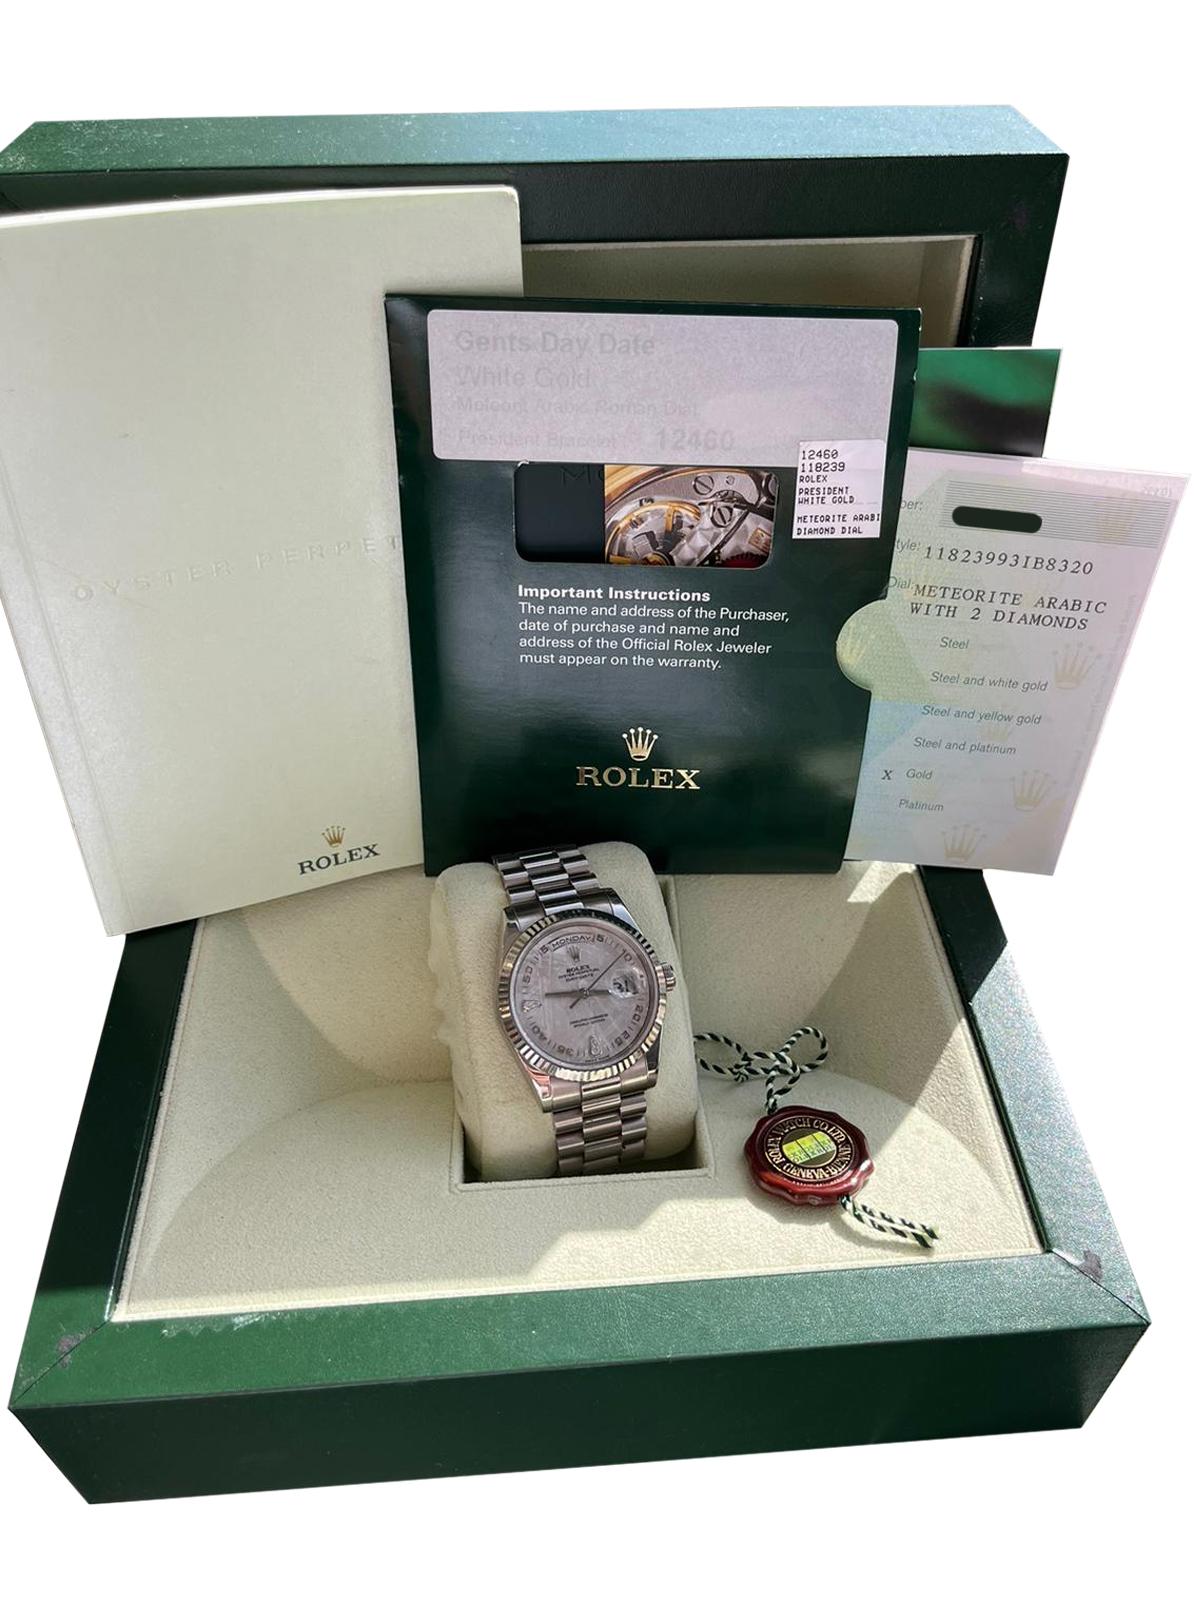 Rolex Day-Date 36mm Oyster Perpetual 118239, 18k white gold on an 18k white gold presidential bracelet, automatic Rolex caliber 3155 double quick set movement, silver meteorite dial with applied white gold and diamond hour markers at 6 and 9